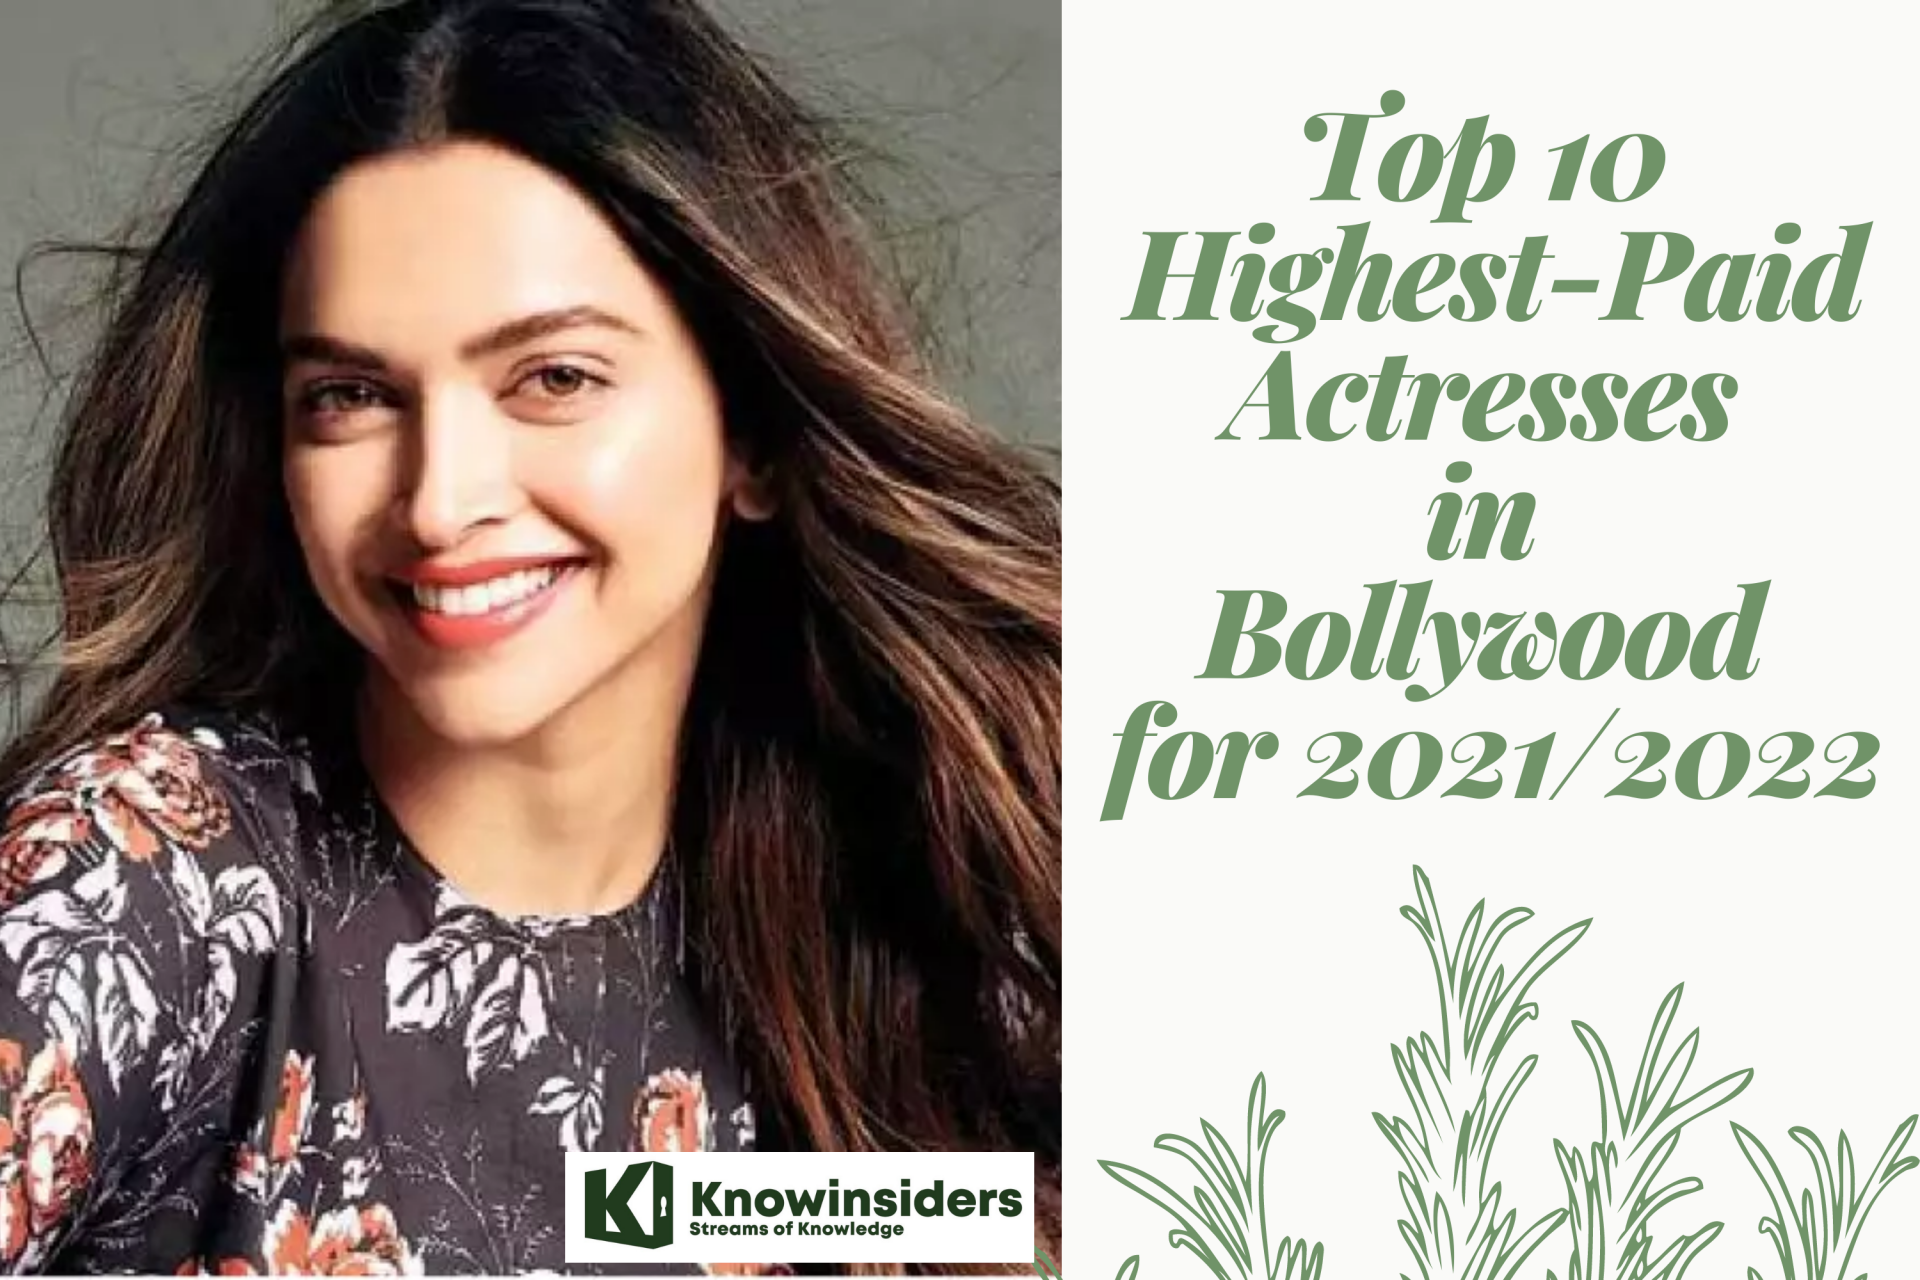 Top 10 Highest Paid Actresses in Bollywood for 2021/2022